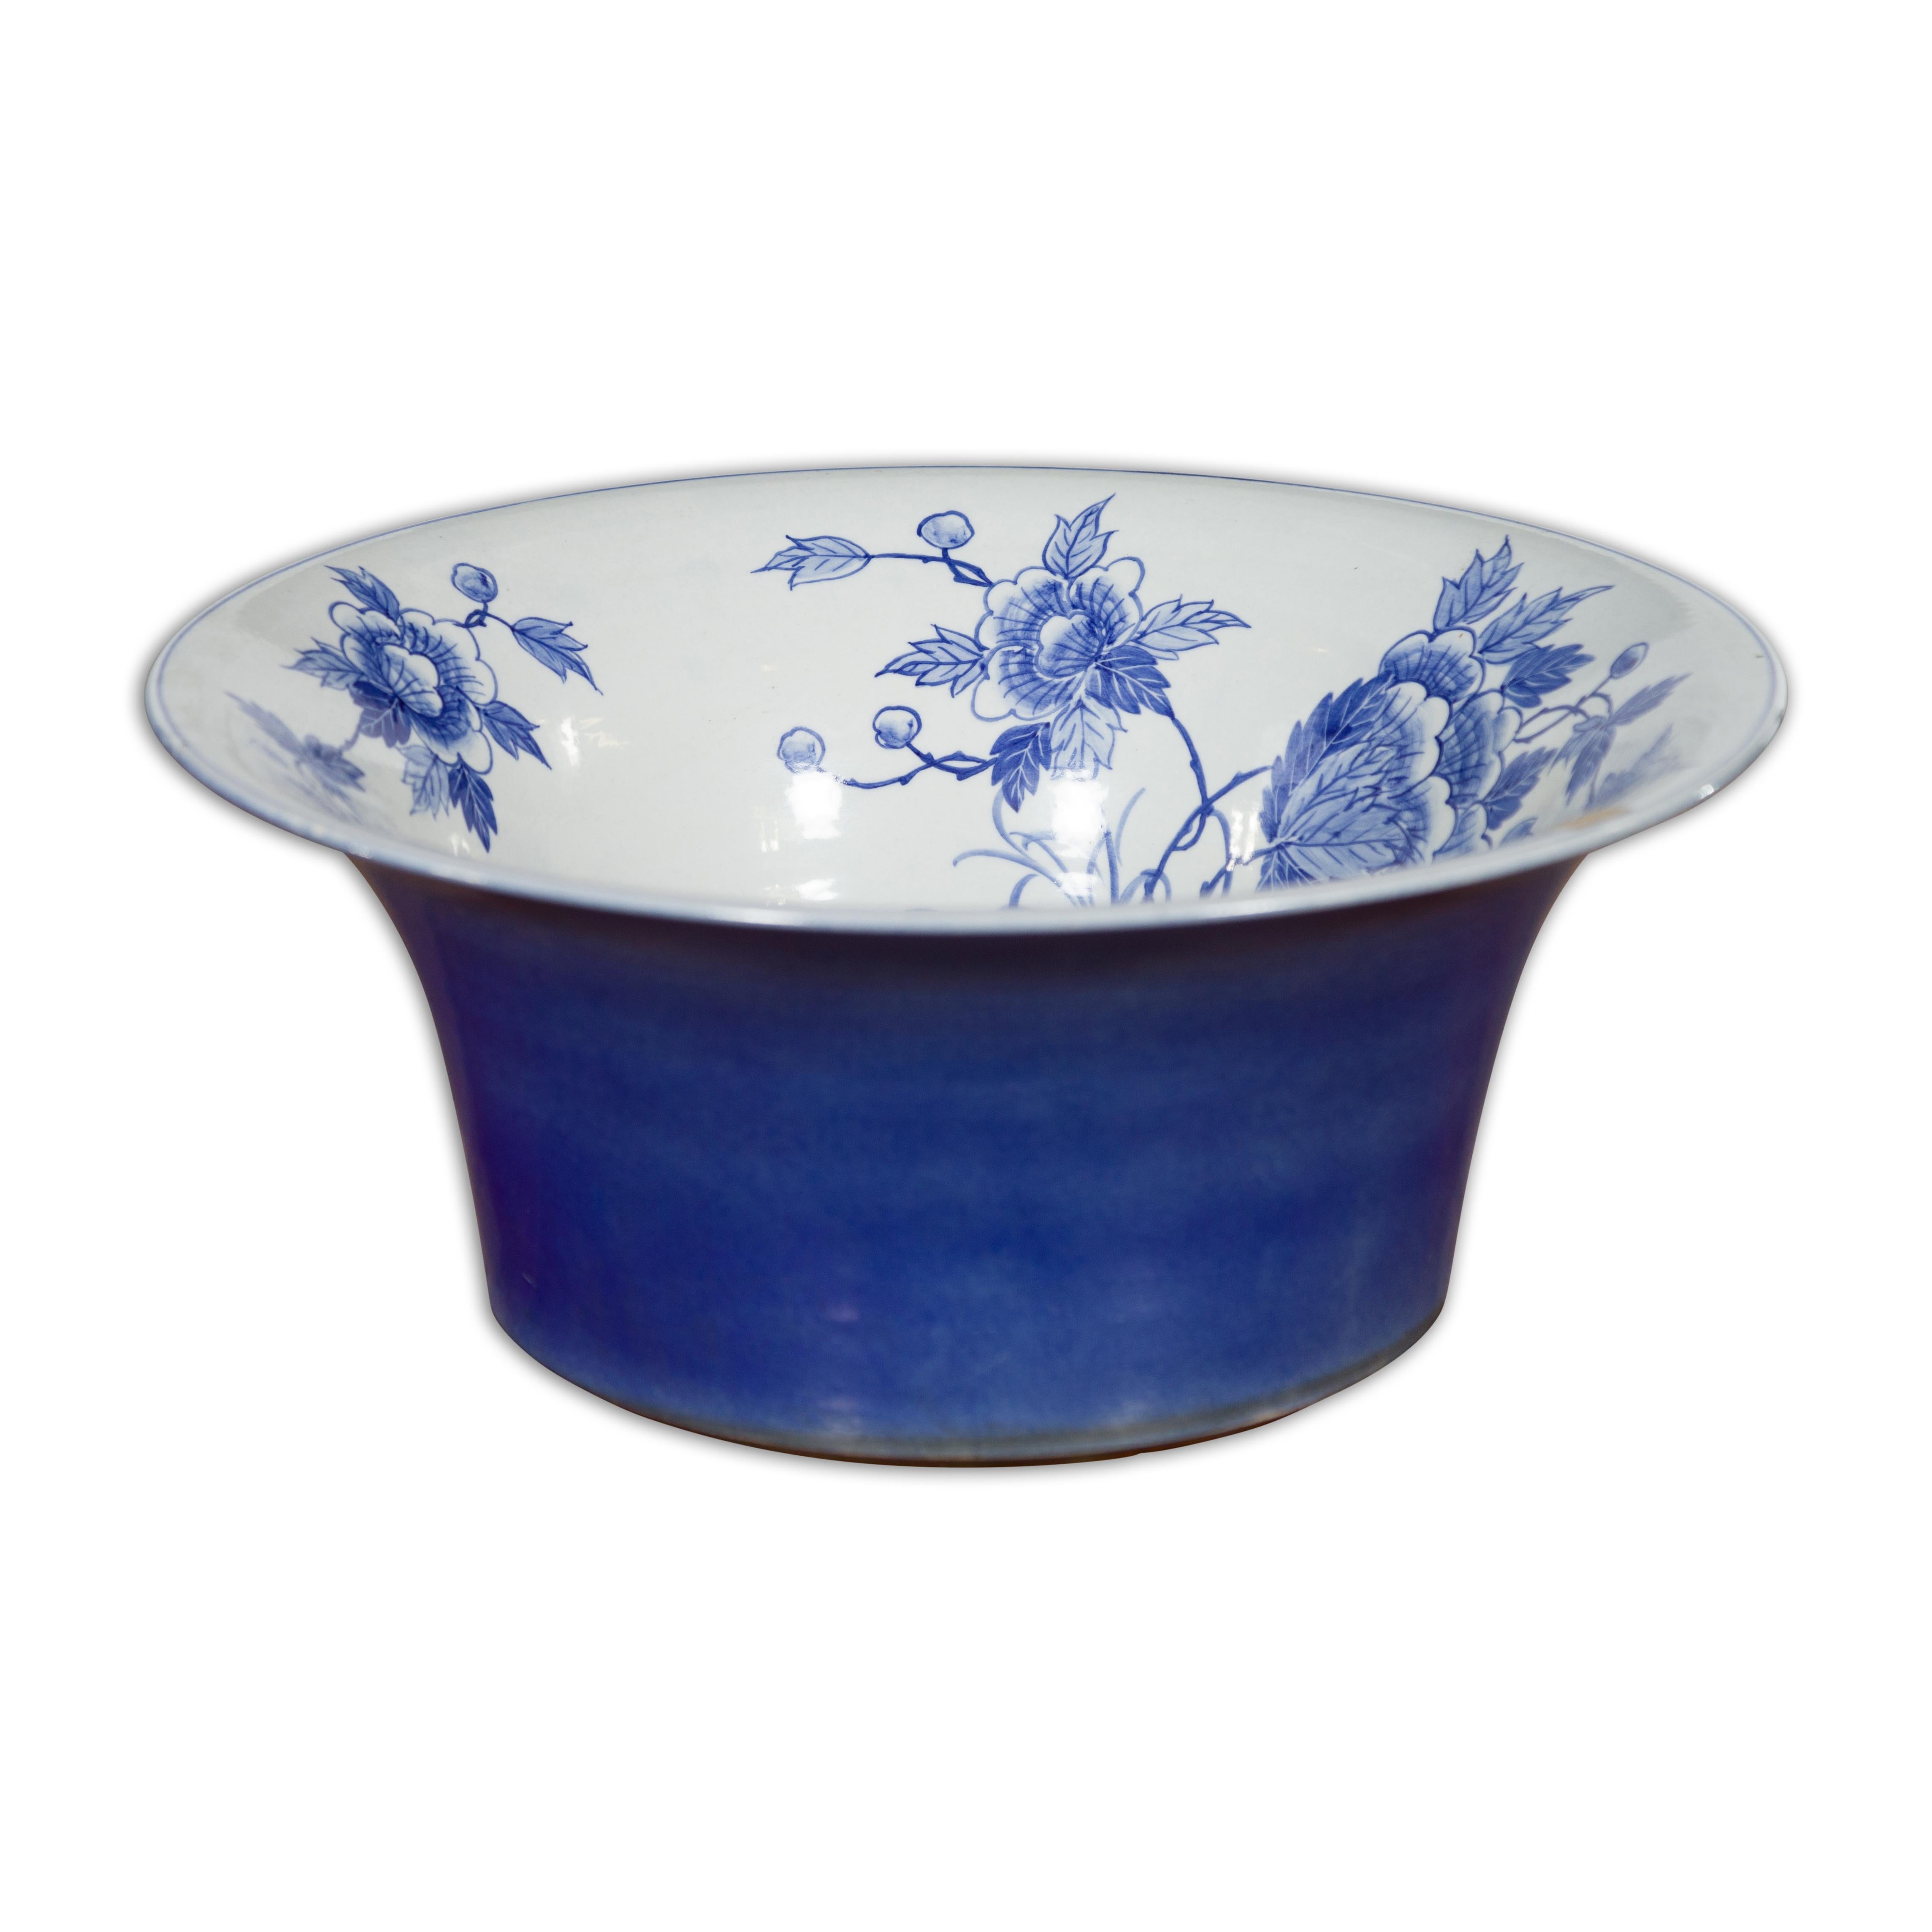 Chinese Blue and White Porcelain Wash Basin with Floral Motifs and Cobalt Blue For Sale 12